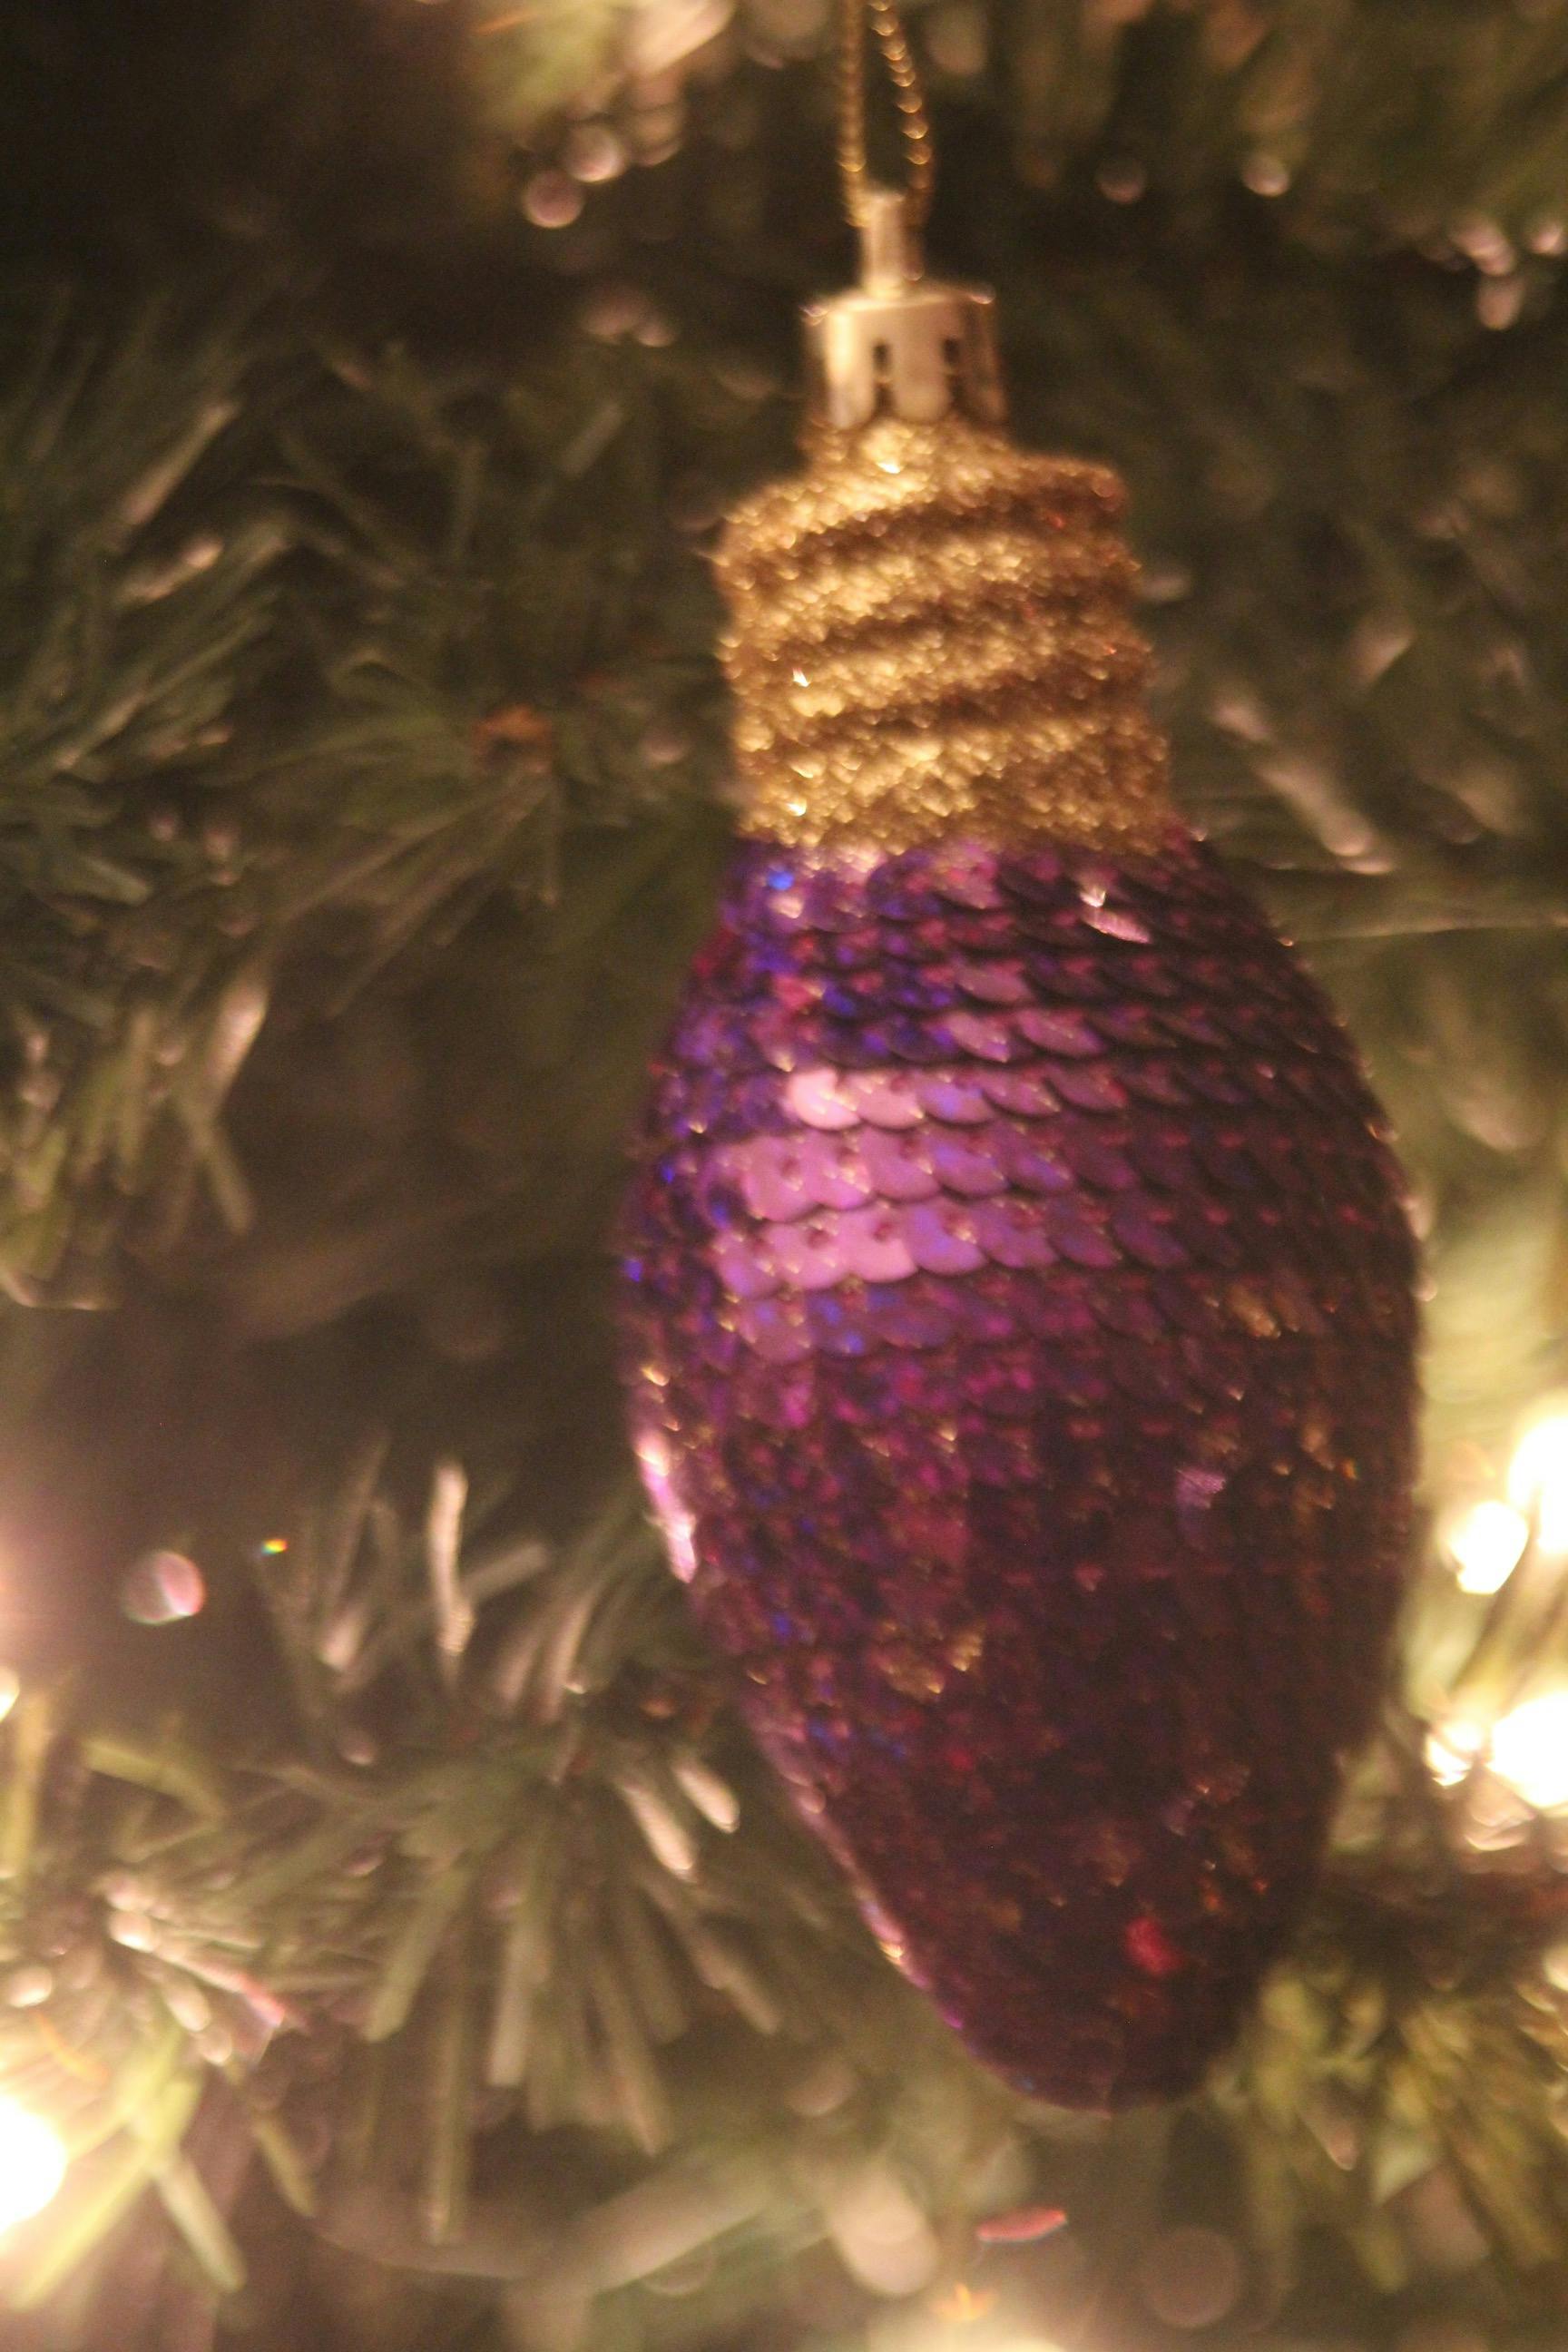 Close-up of Christmas Decoration Hanging on Tree